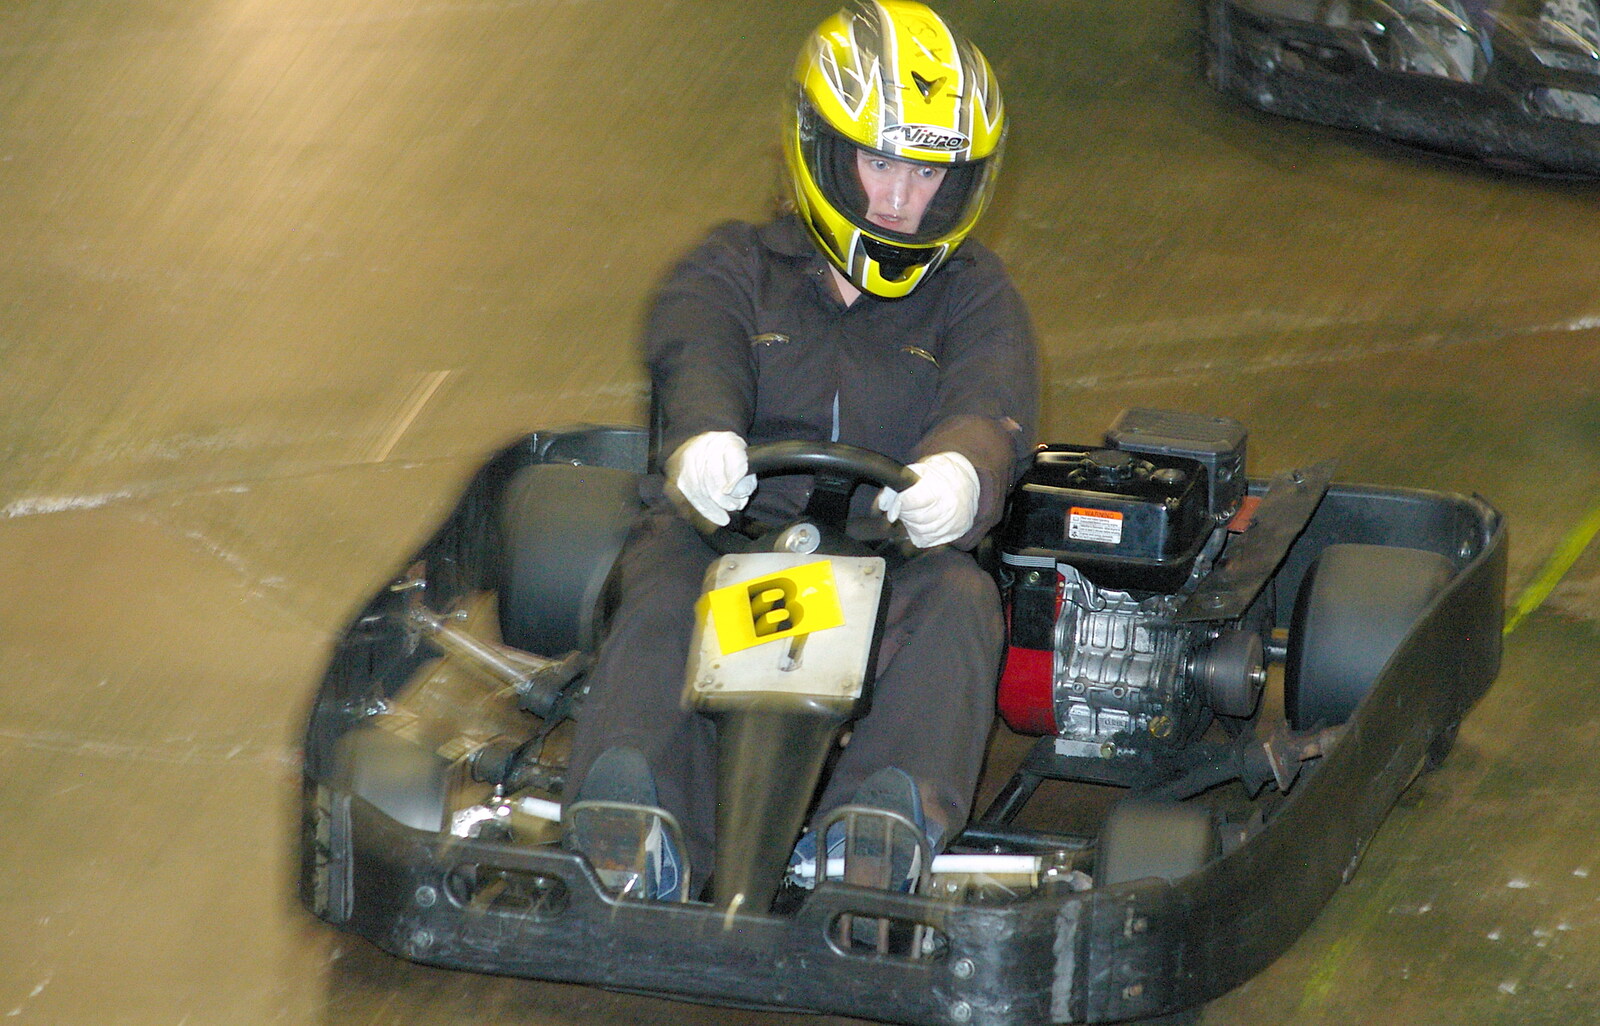 Isobel still looks scared from Qualcomm goes Karting in Caxton, Cambridgeshire - 7th November 2005